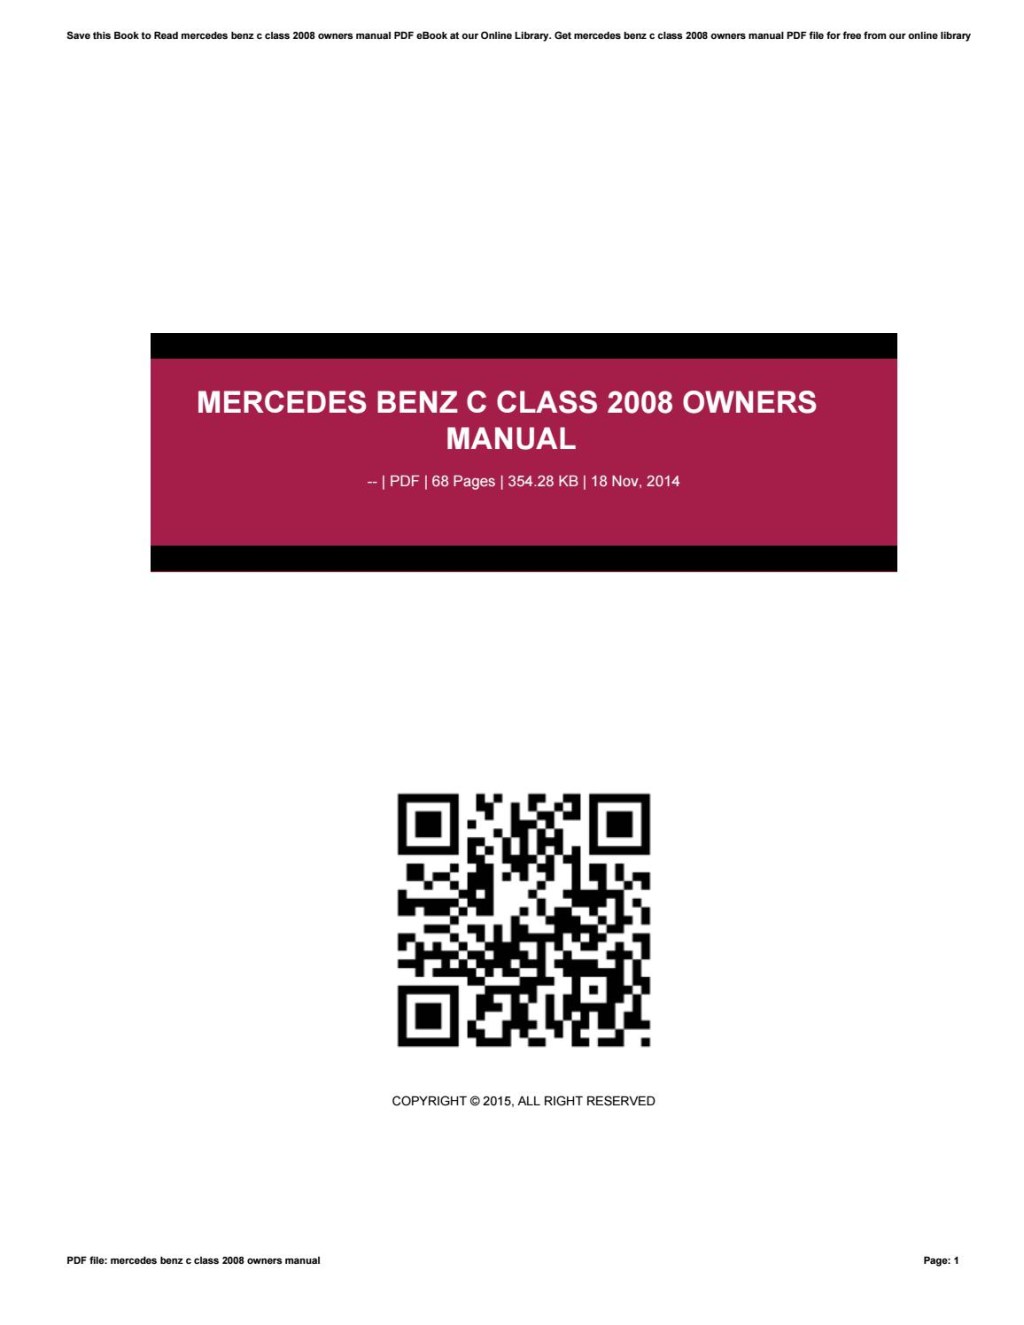 Picture of: Mercedes benz c class  owners manual by janilaamanda – Issuu